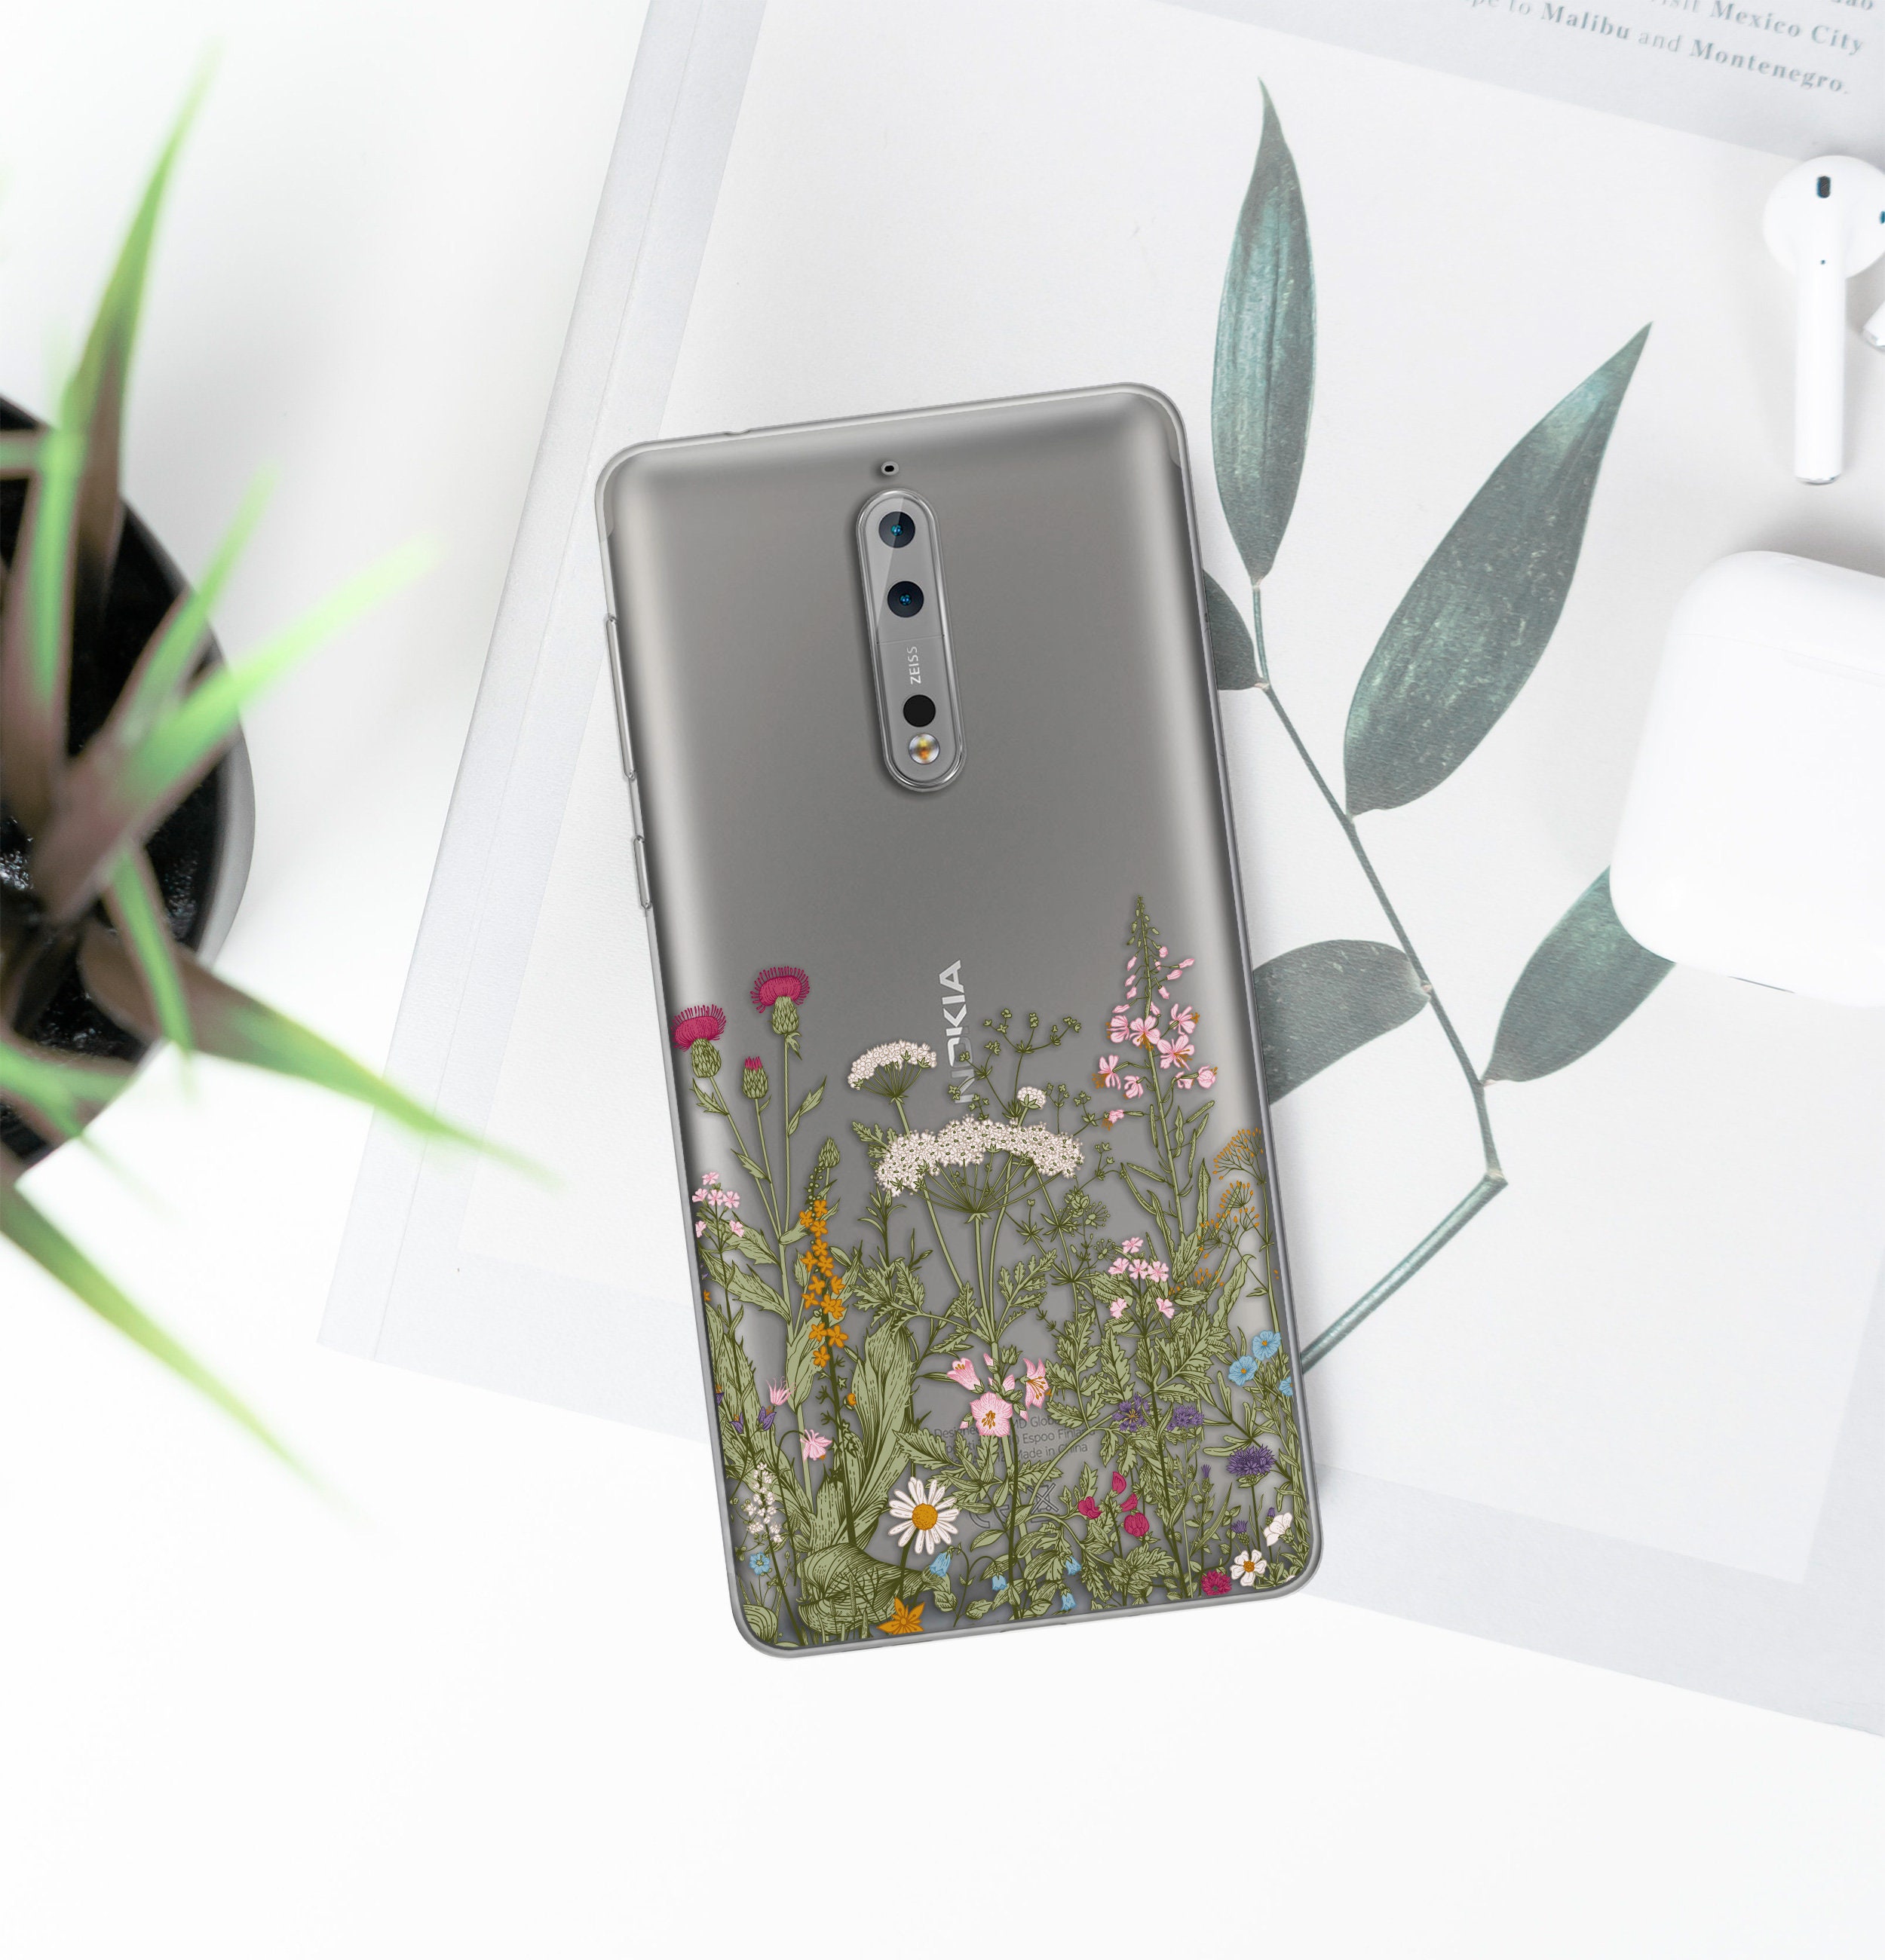 Verhandeling vleet duisternis Wildflowers Sony Xperia Case Xperia Z5 Compact Herbs Xperia - Etsy